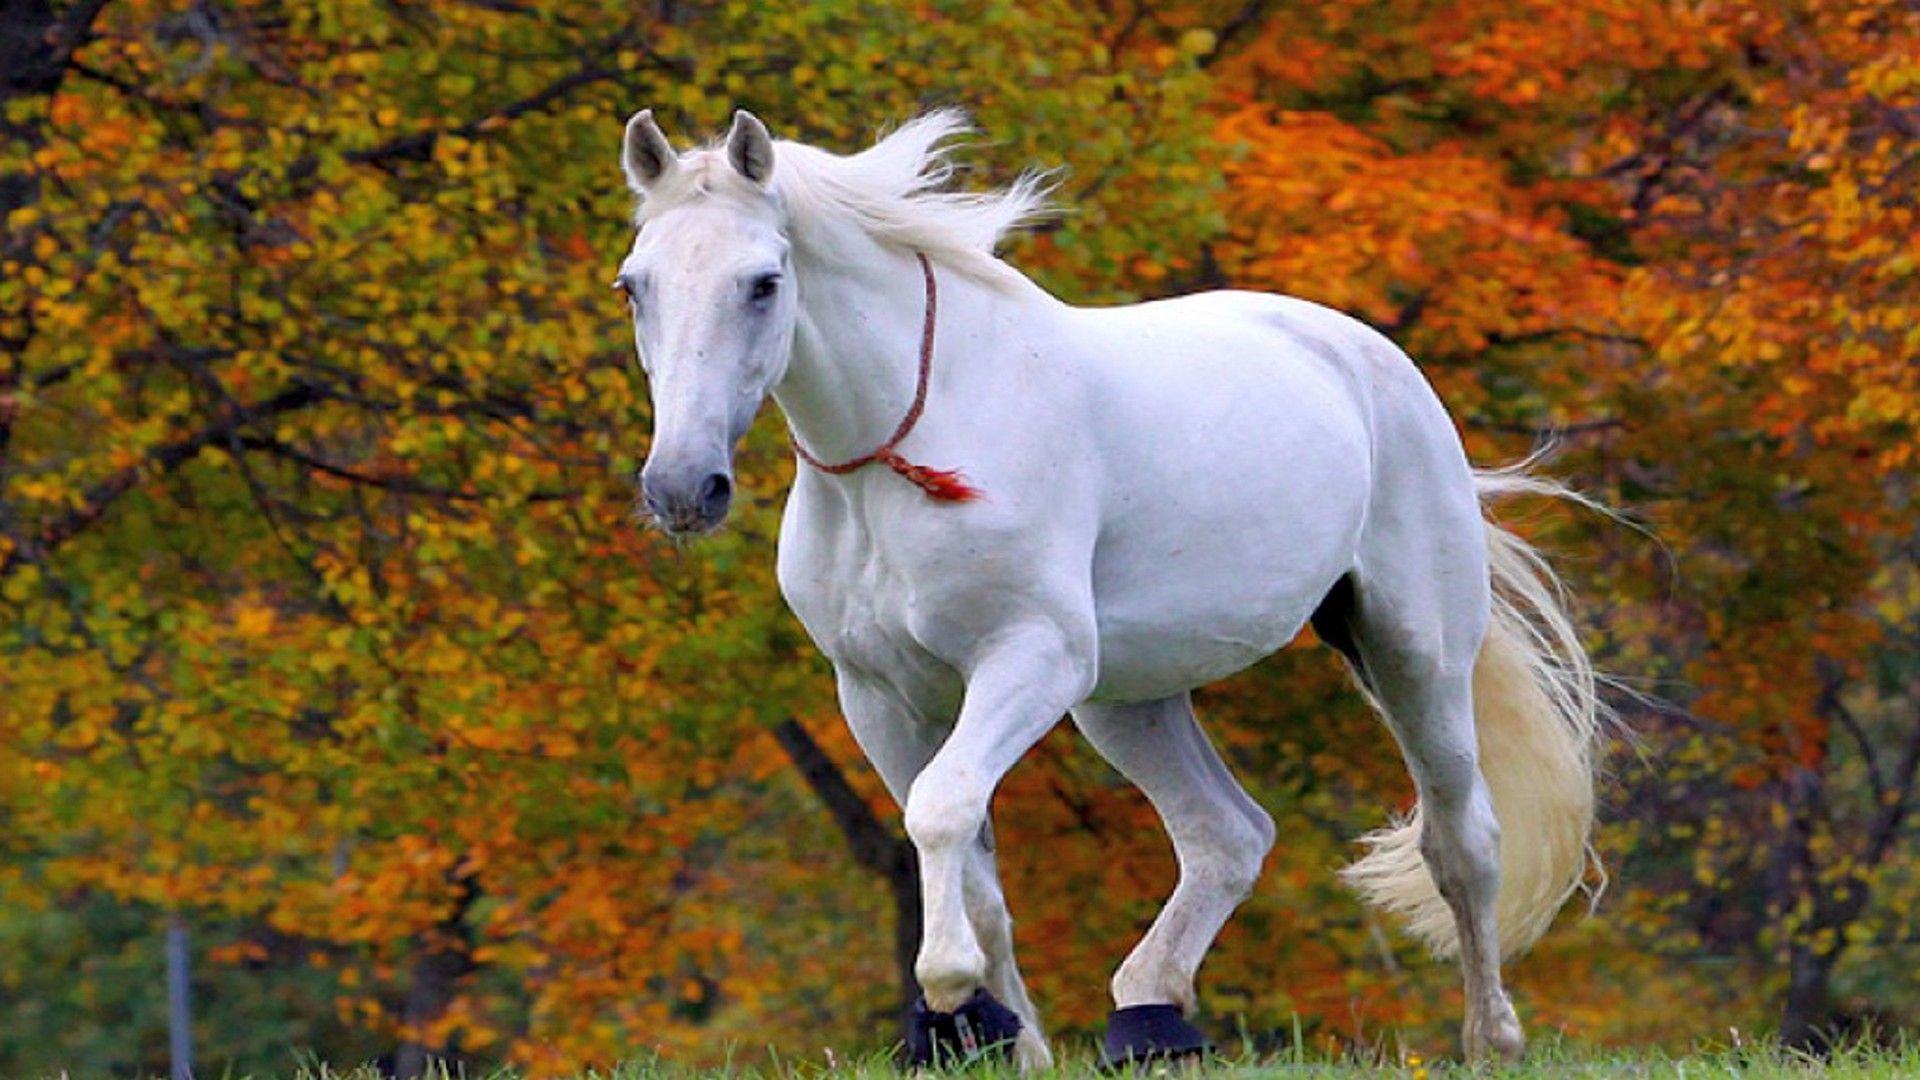 Horse Images And Wallpapers • Trumpwallpapers